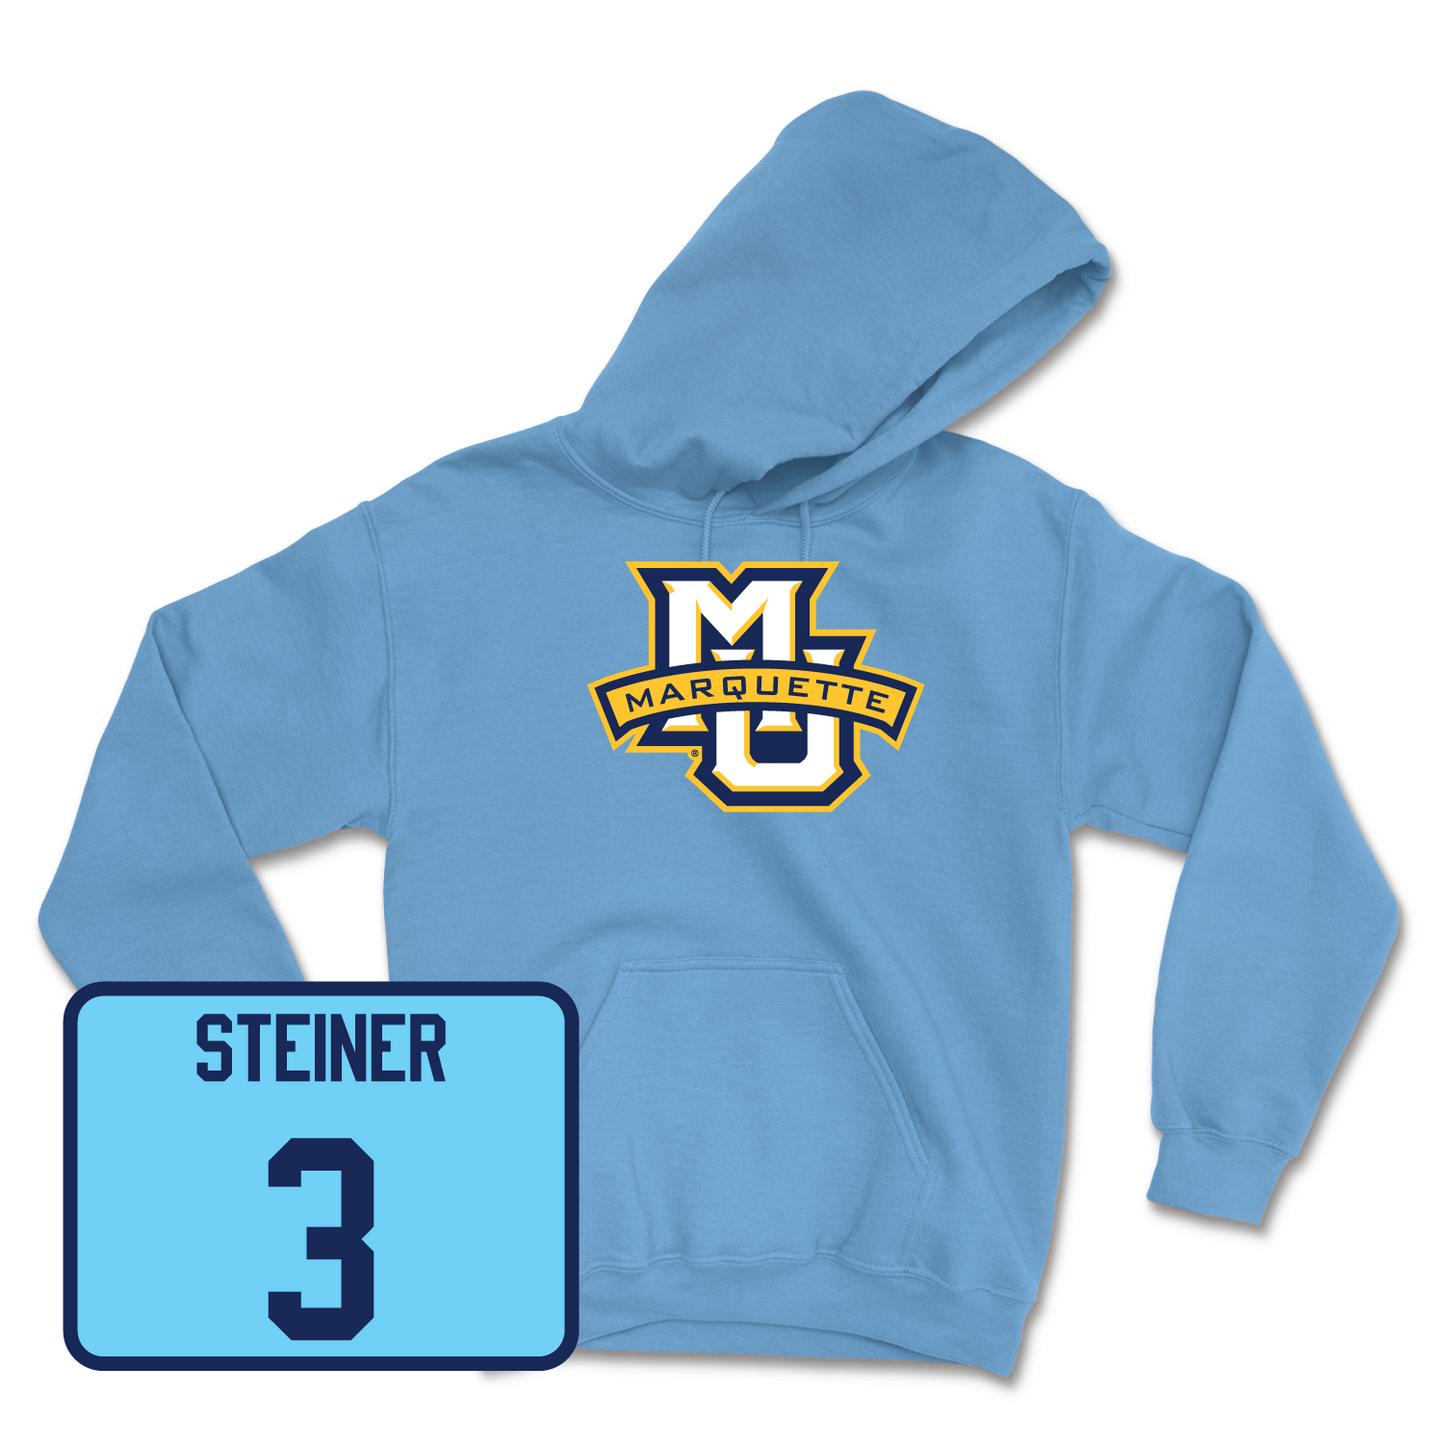 Championship Blue Women's Lacrosse Marquette Hoodie 2 Youth Large / Leigh Steiner | #3